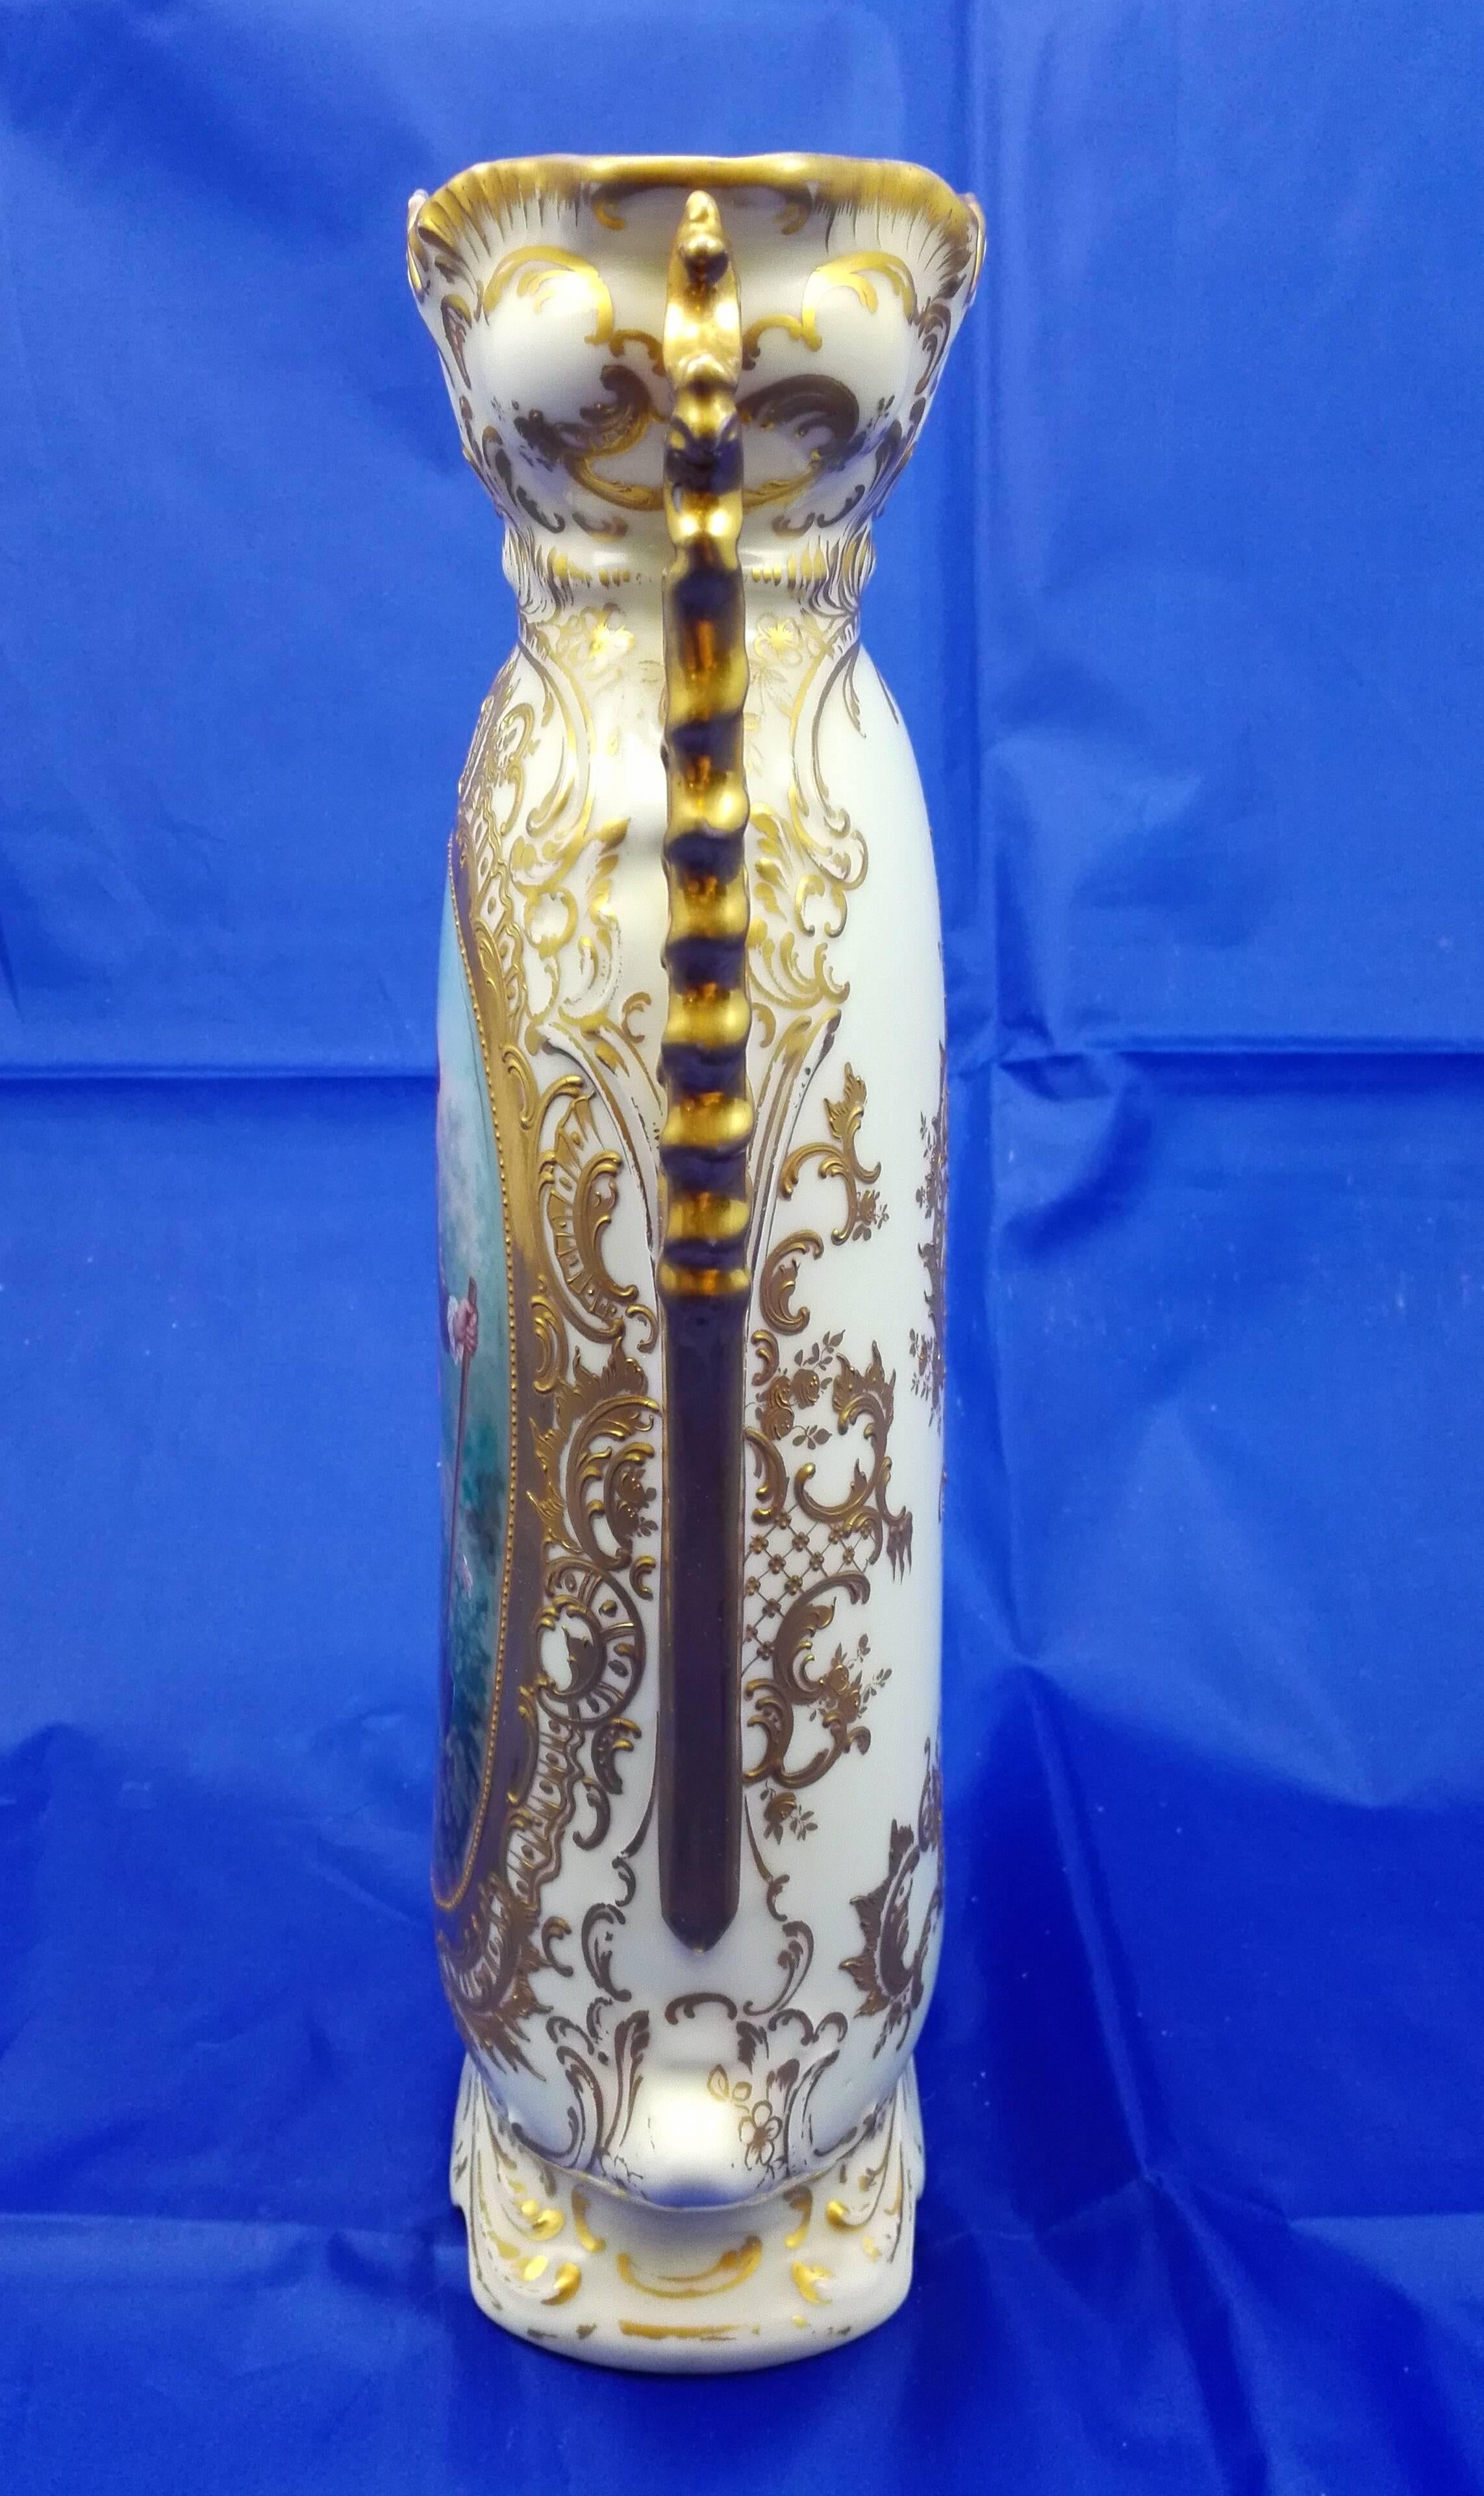 Empire Revival 19th Century Old Vienna Marked Porcelain Vase Figural Hand-Painted and Gilded For Sale